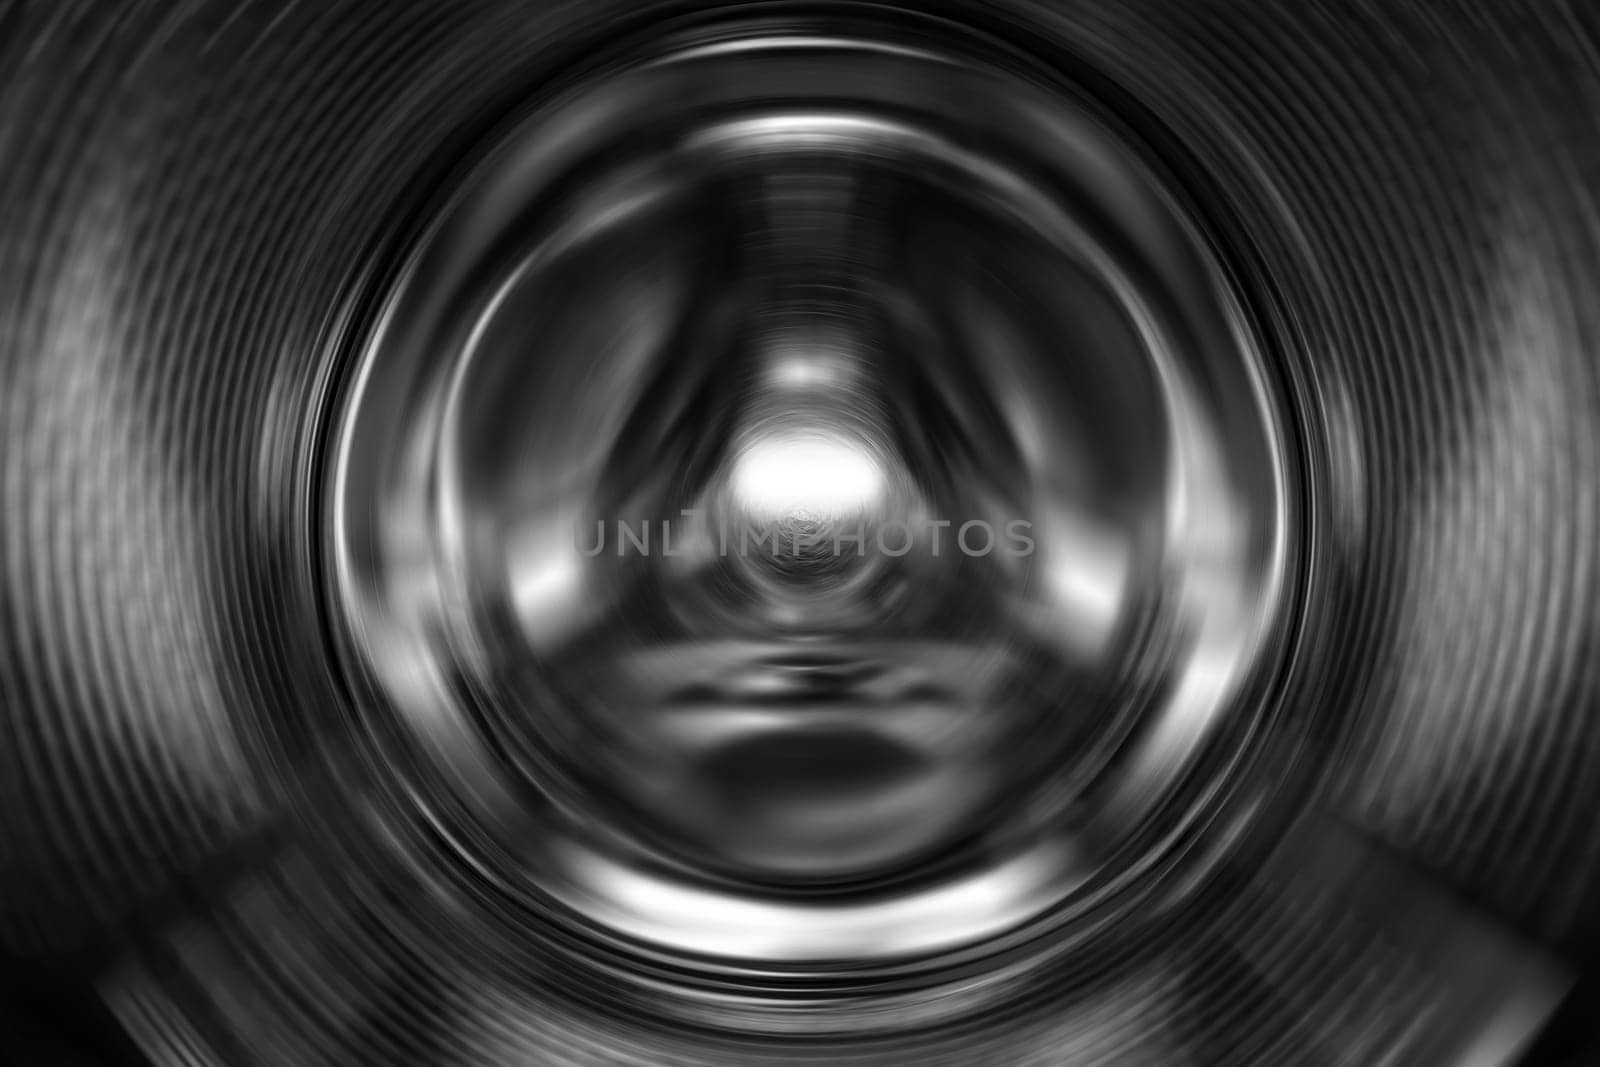 Washing Dryer Machine inside view during work. Drum of the washing machine rotates, view from the inside. Metal drum of a washing machine. Abstract home background. Inside of washing machine by EvgeniyQW